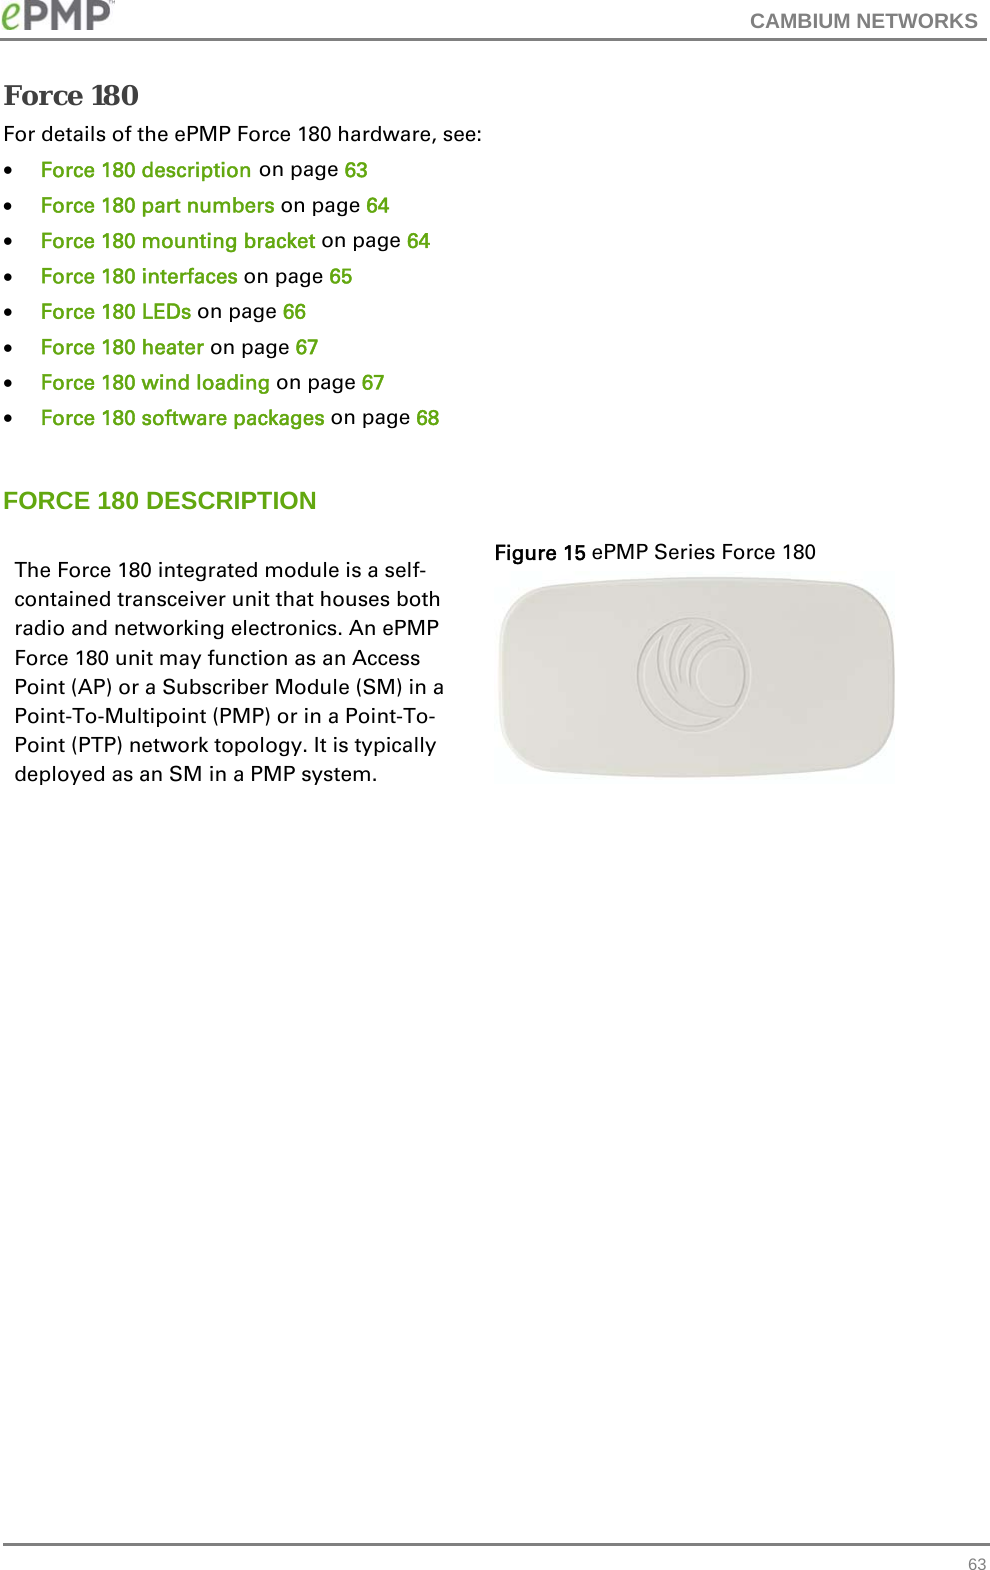 CAMBIUM NETWORKS   63Force 180 For details of the ePMP Force 180 hardware, see:  Force 180 description on page 63  Force 180 part numbers on page 64   Force 180 mounting bracket on page 64   Force 180 interfaces on page 65   Force 180 LEDs on page 66  Force 180 heater on page 67  Force 180 wind loading on page 67  Force 180 software packages on page 68  FORCE 180 DESCRIPTION The Force 180 integrated module is a self-contained transceiver unit that houses both radio and networking electronics. An ePMP Force 180 unit may function as an Access Point (AP) or a Subscriber Module (SM) in a Point-To-Multipoint (PMP) or in a Point-To-Point (PTP) network topology. It is typically deployed as an SM in a PMP system. Figure 15 ePMP Series Force 180   